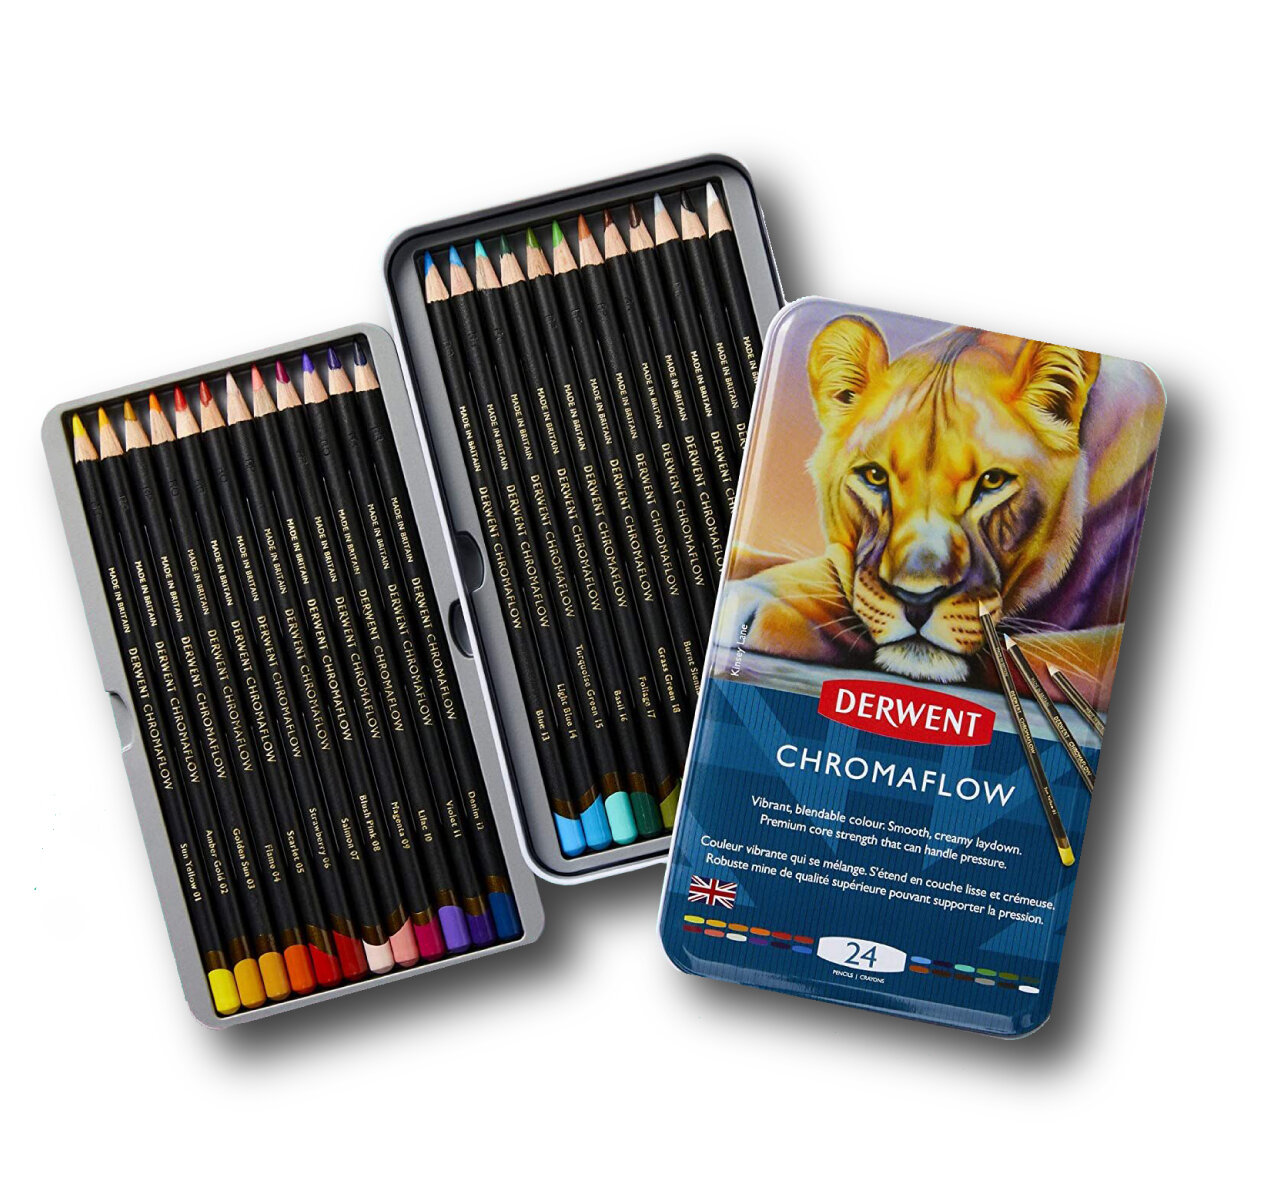 Master 24 Colored Pencil Skin and Hair Tone Set with Premium Soft Thick  Core Vibrant Color Leads - Professional Ultra-Smooth Artist Quality -  Portrait